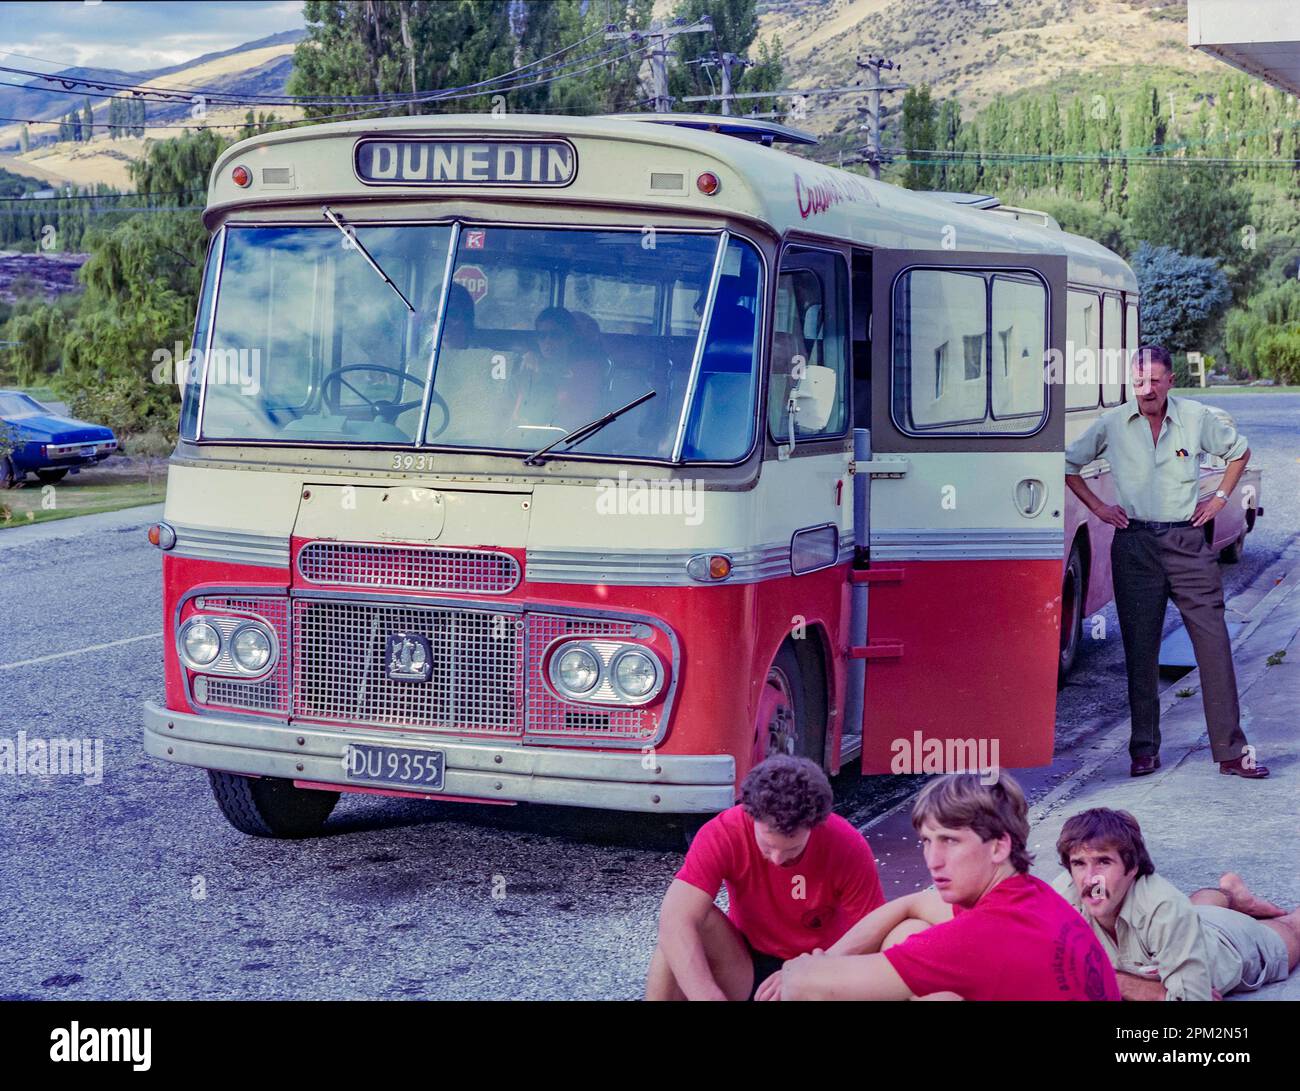 A 1981 historic image of a Railways Road Services Bedford SB3 Cruiser Coach stopped beside the road on its journey to Dunedin from Christchurch on the south island of New Zealand. Passengers can be seen sitting and standing near the bus while they wait for the driver. Stock Photo